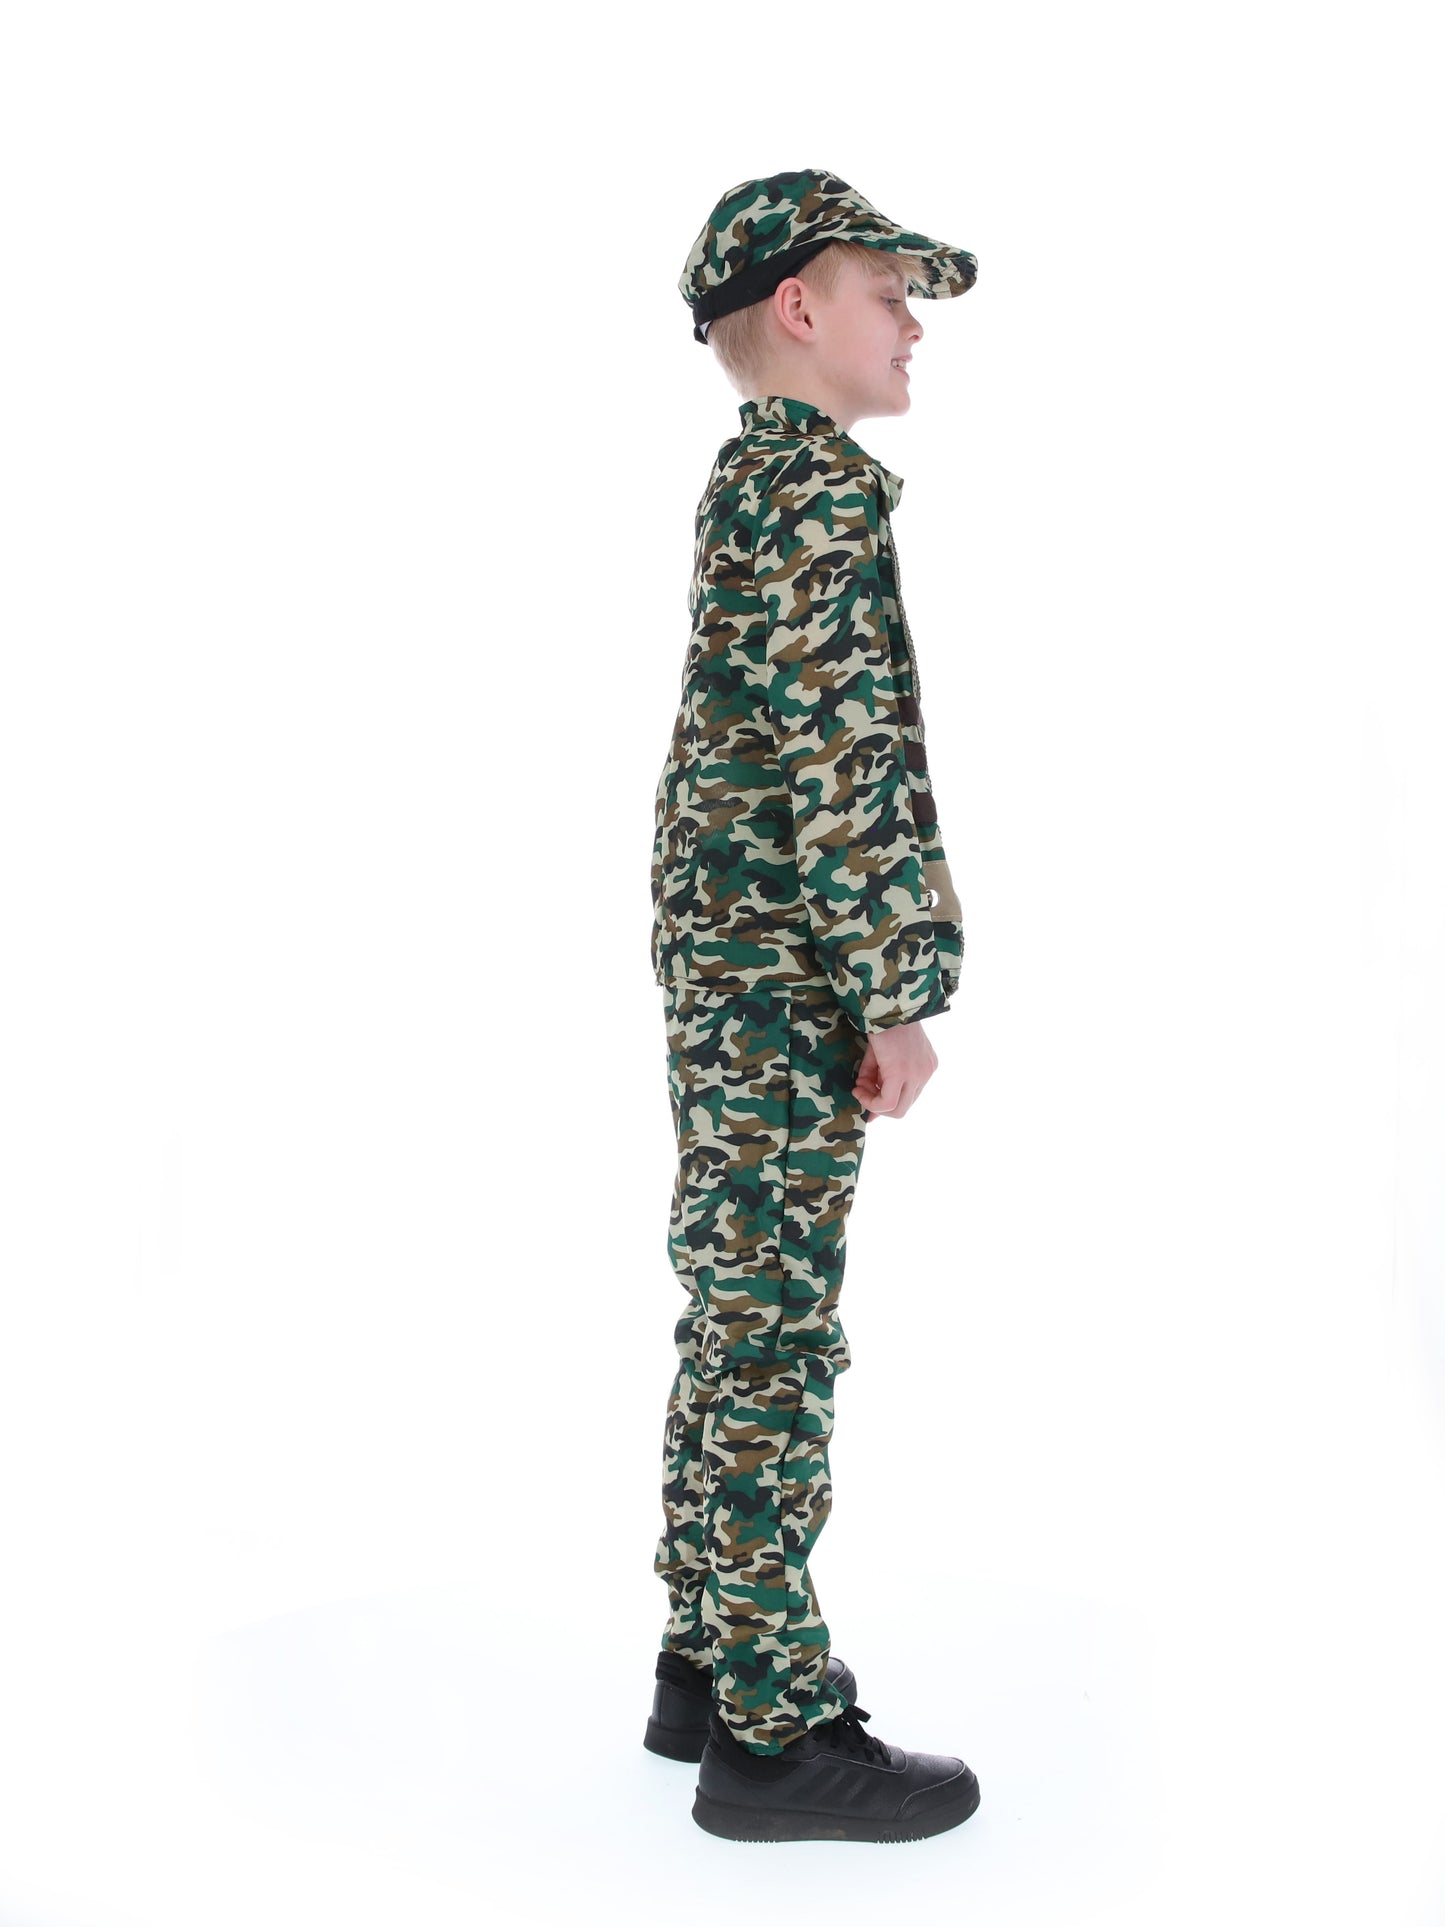 Camouflage Military Boy Costume